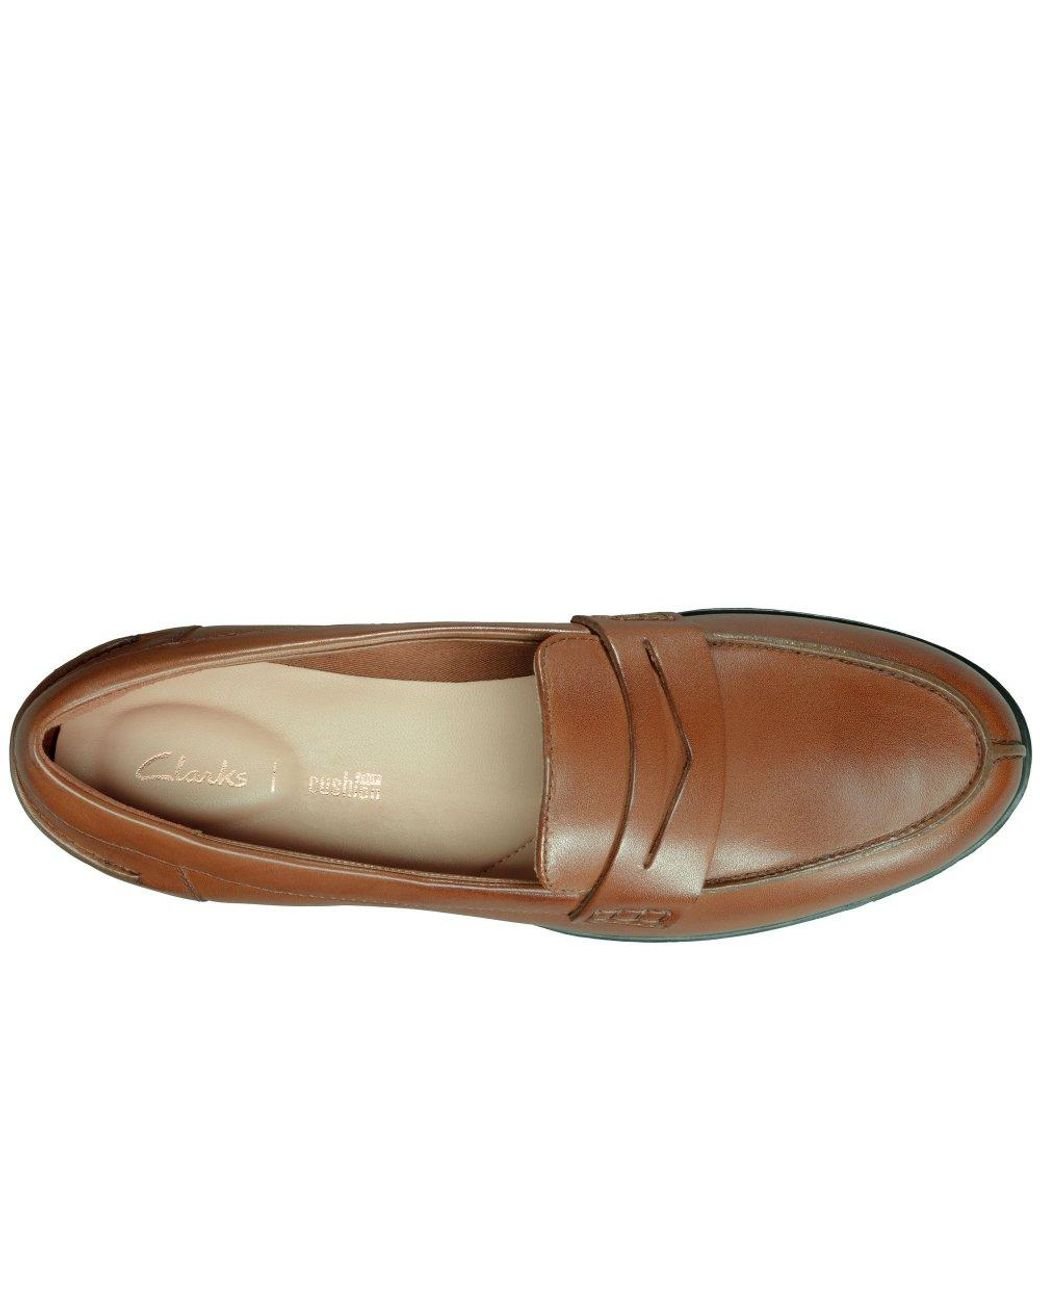 Clarks Hamble Loafer Wide Fit Shoes in Brown | Lyst Canada